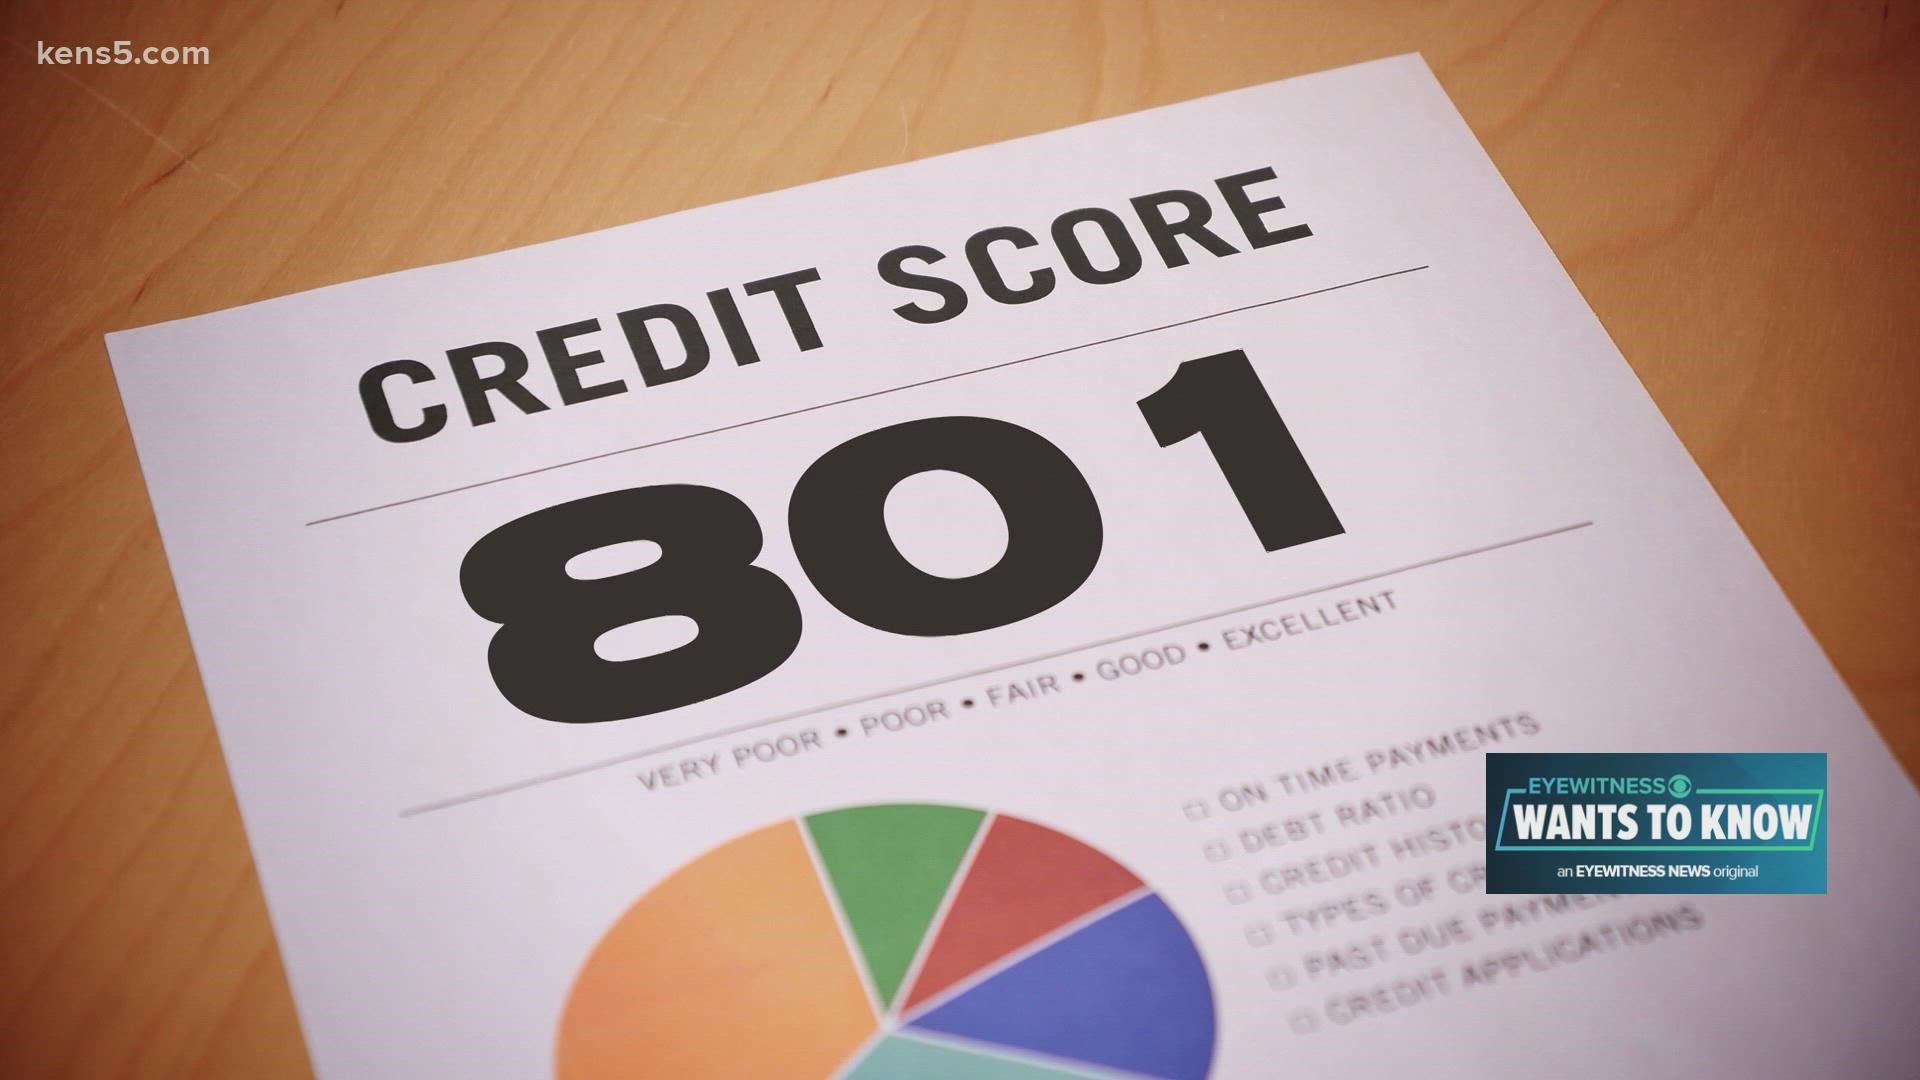 An exceptional credit score can save you a lot of money in lower interest rates and fees, but getting to 800 can be a big climb.